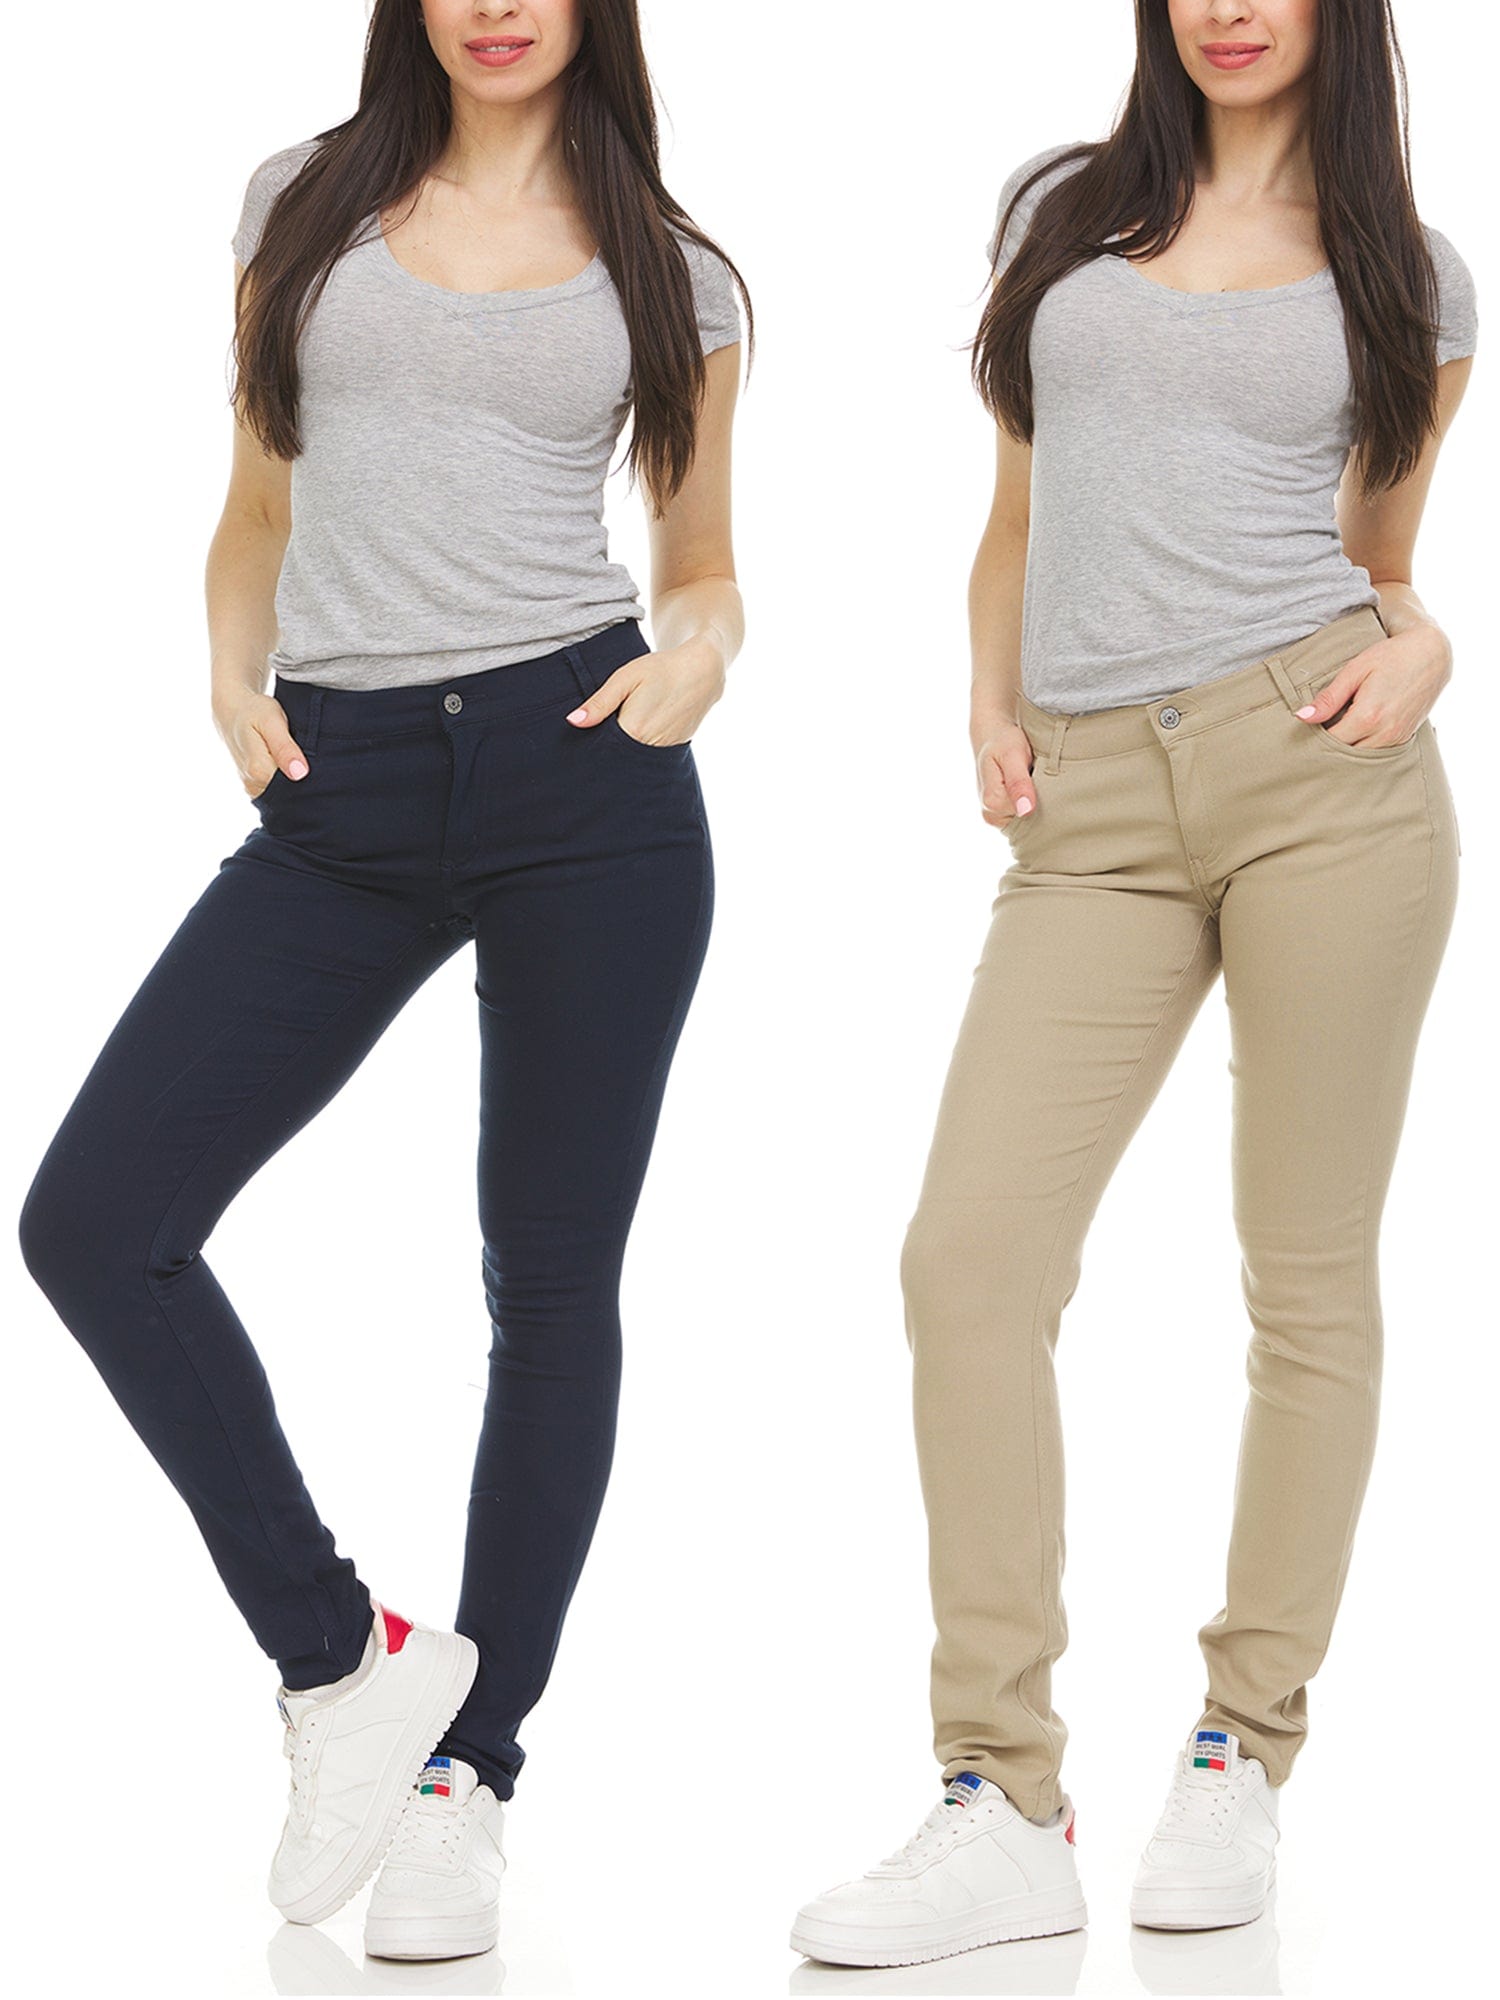 Girl's (2-PACK) Super Stretchy Skinny 5-Pocket Uniform Soft Chino Pants - GalaxybyHarvic